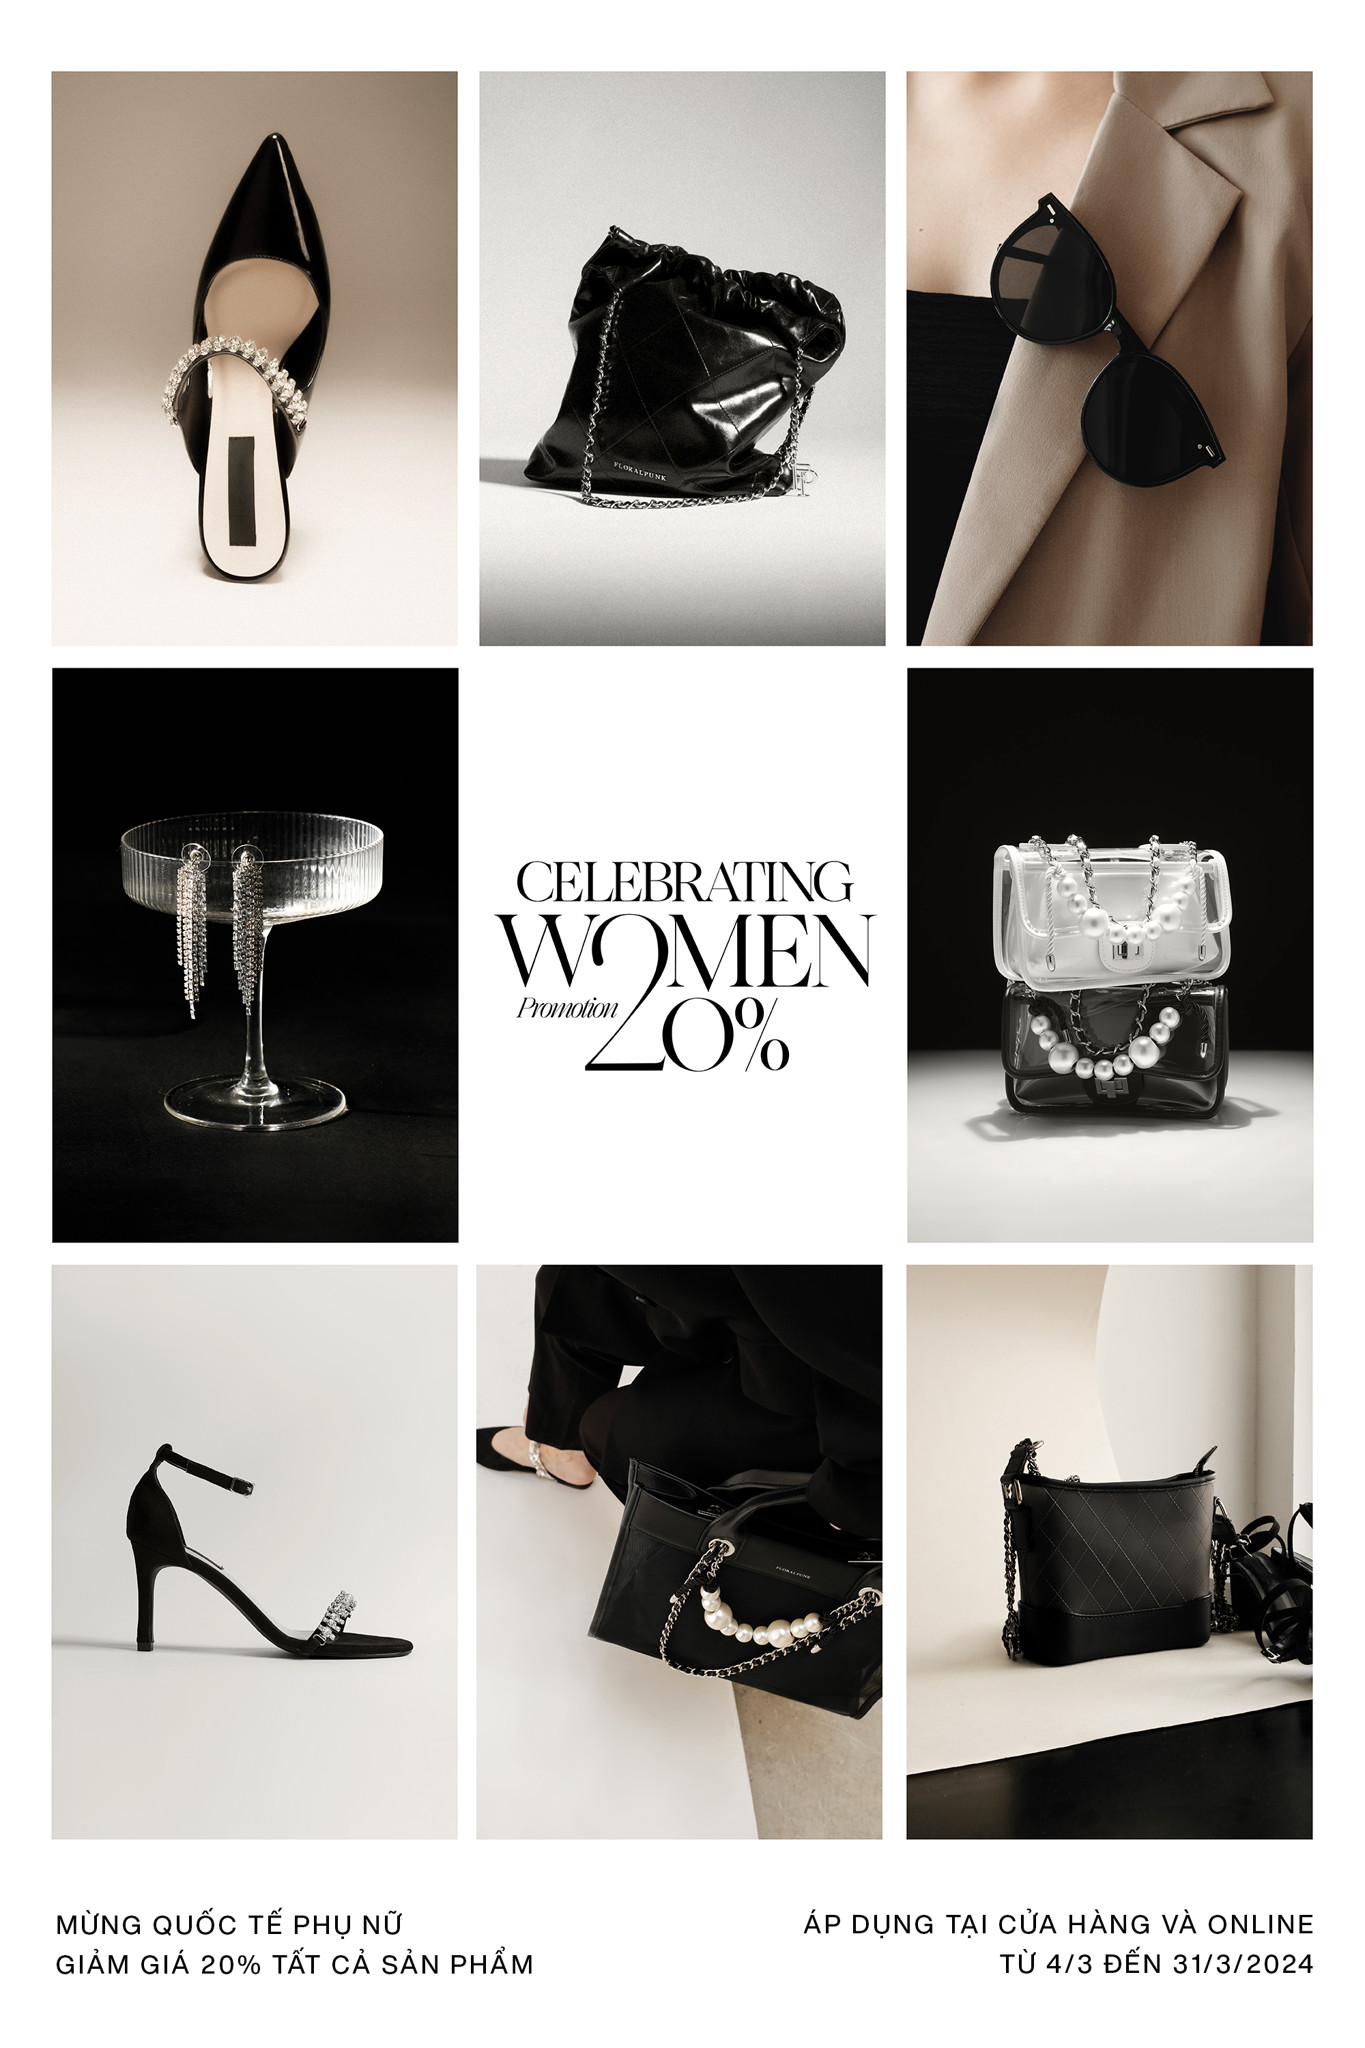 CELEBRATING WOMEN WITH OUR 20% OFF